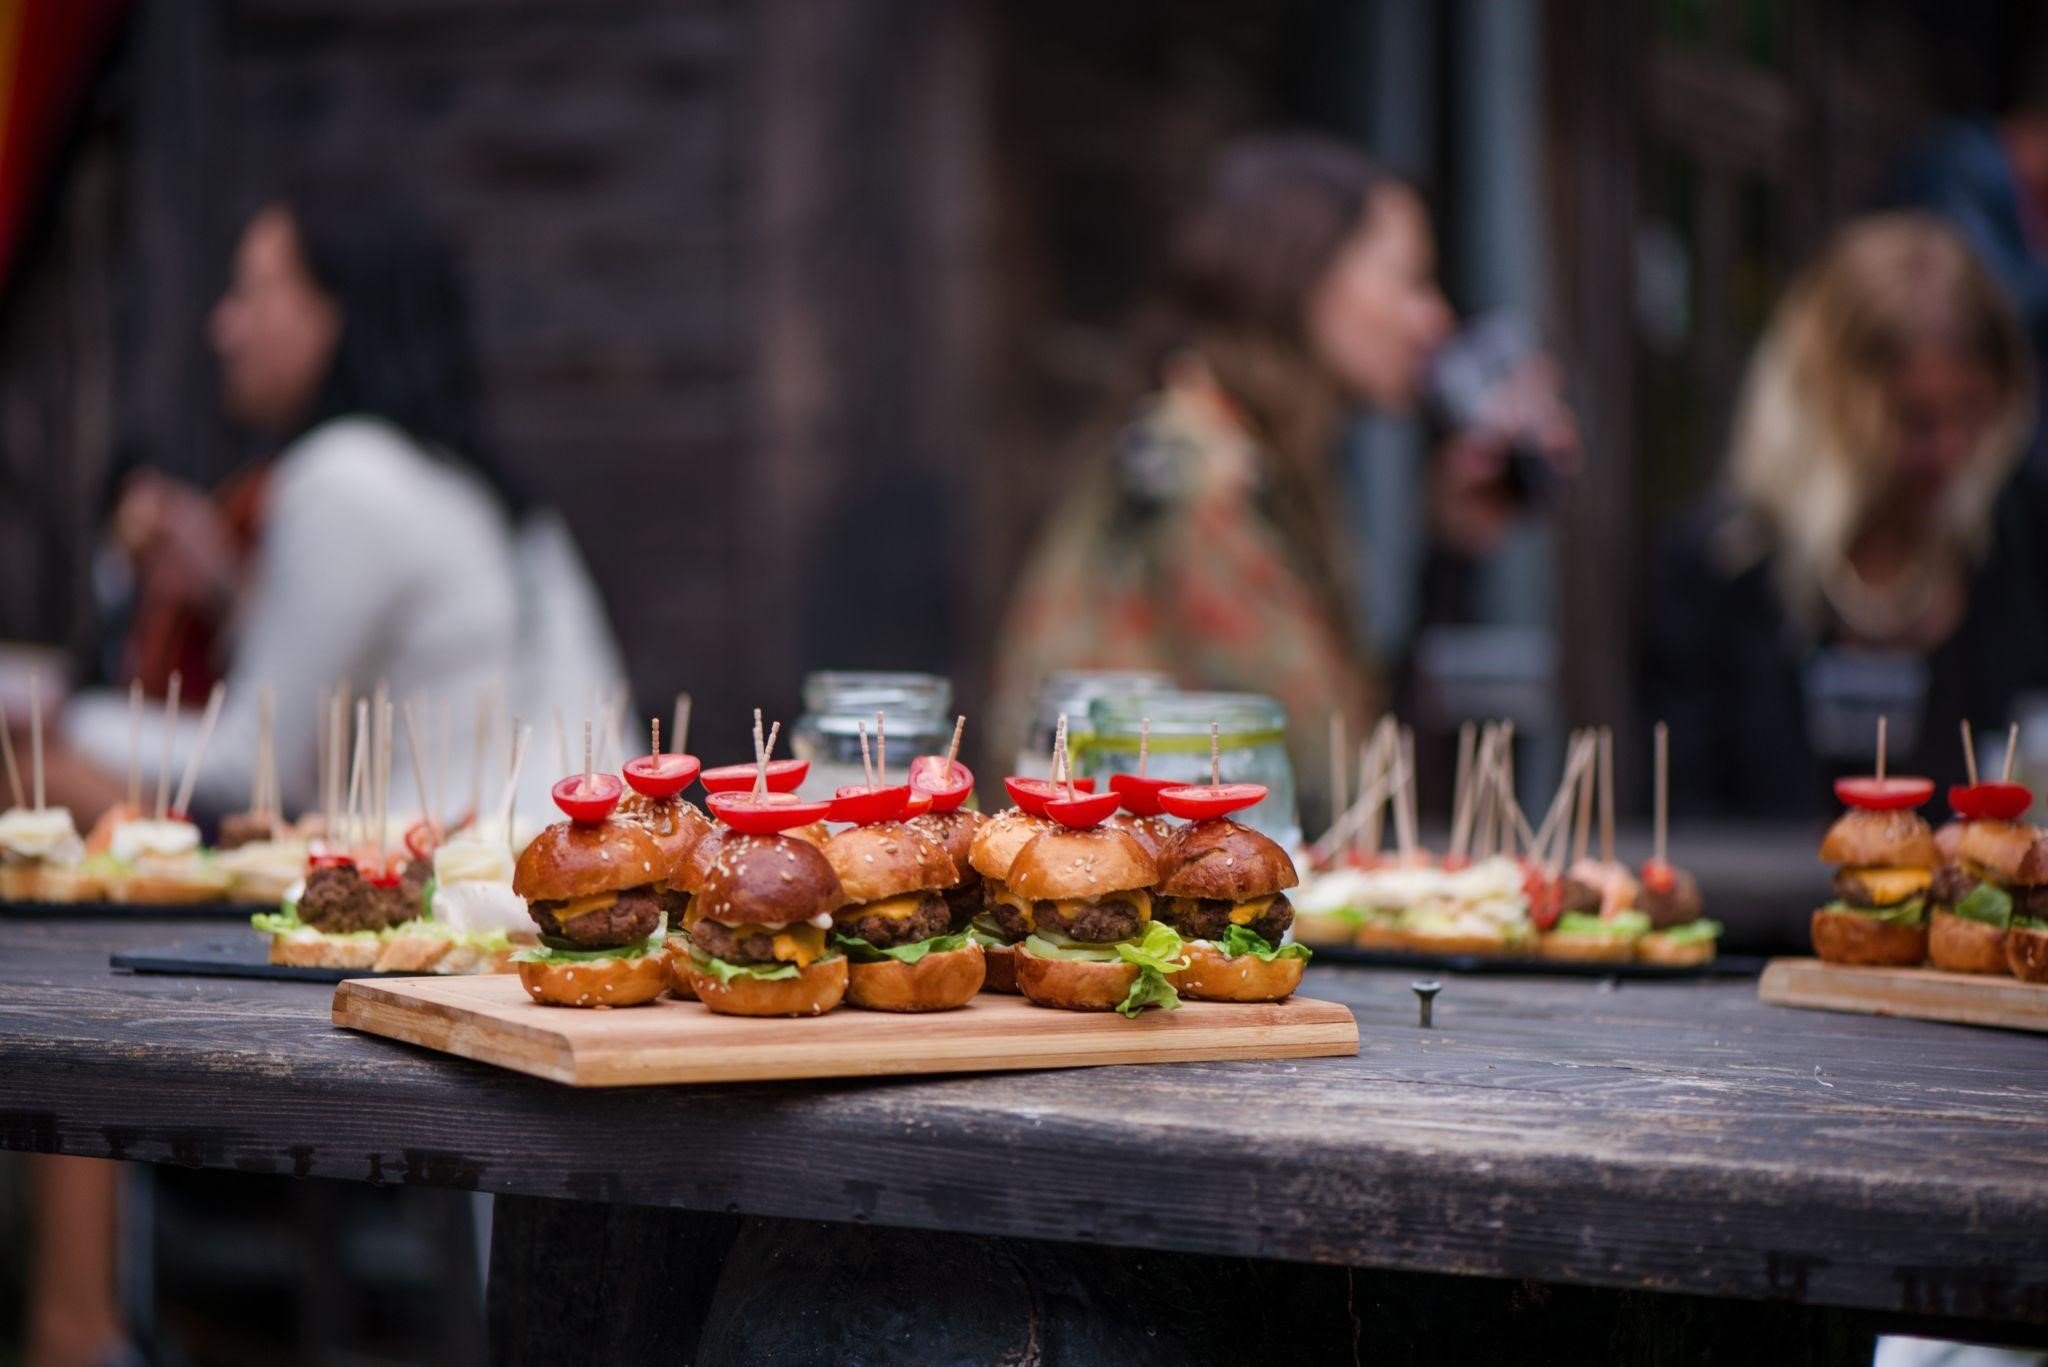 Why the buffet is the perfect meal for corporate events